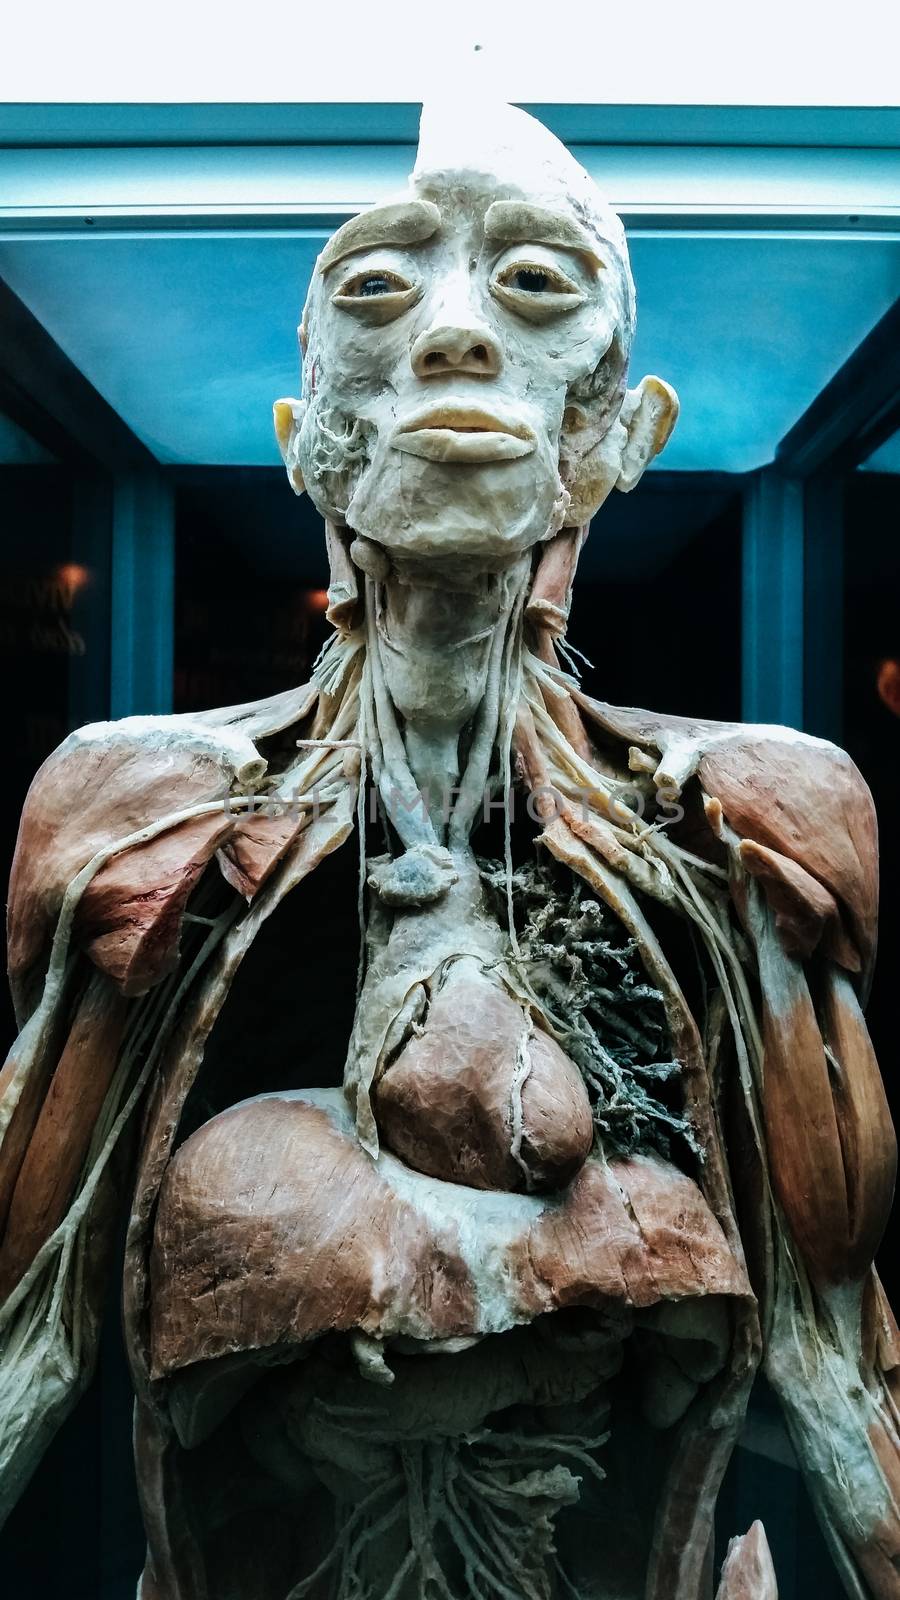 Anatomy model .Part of human body model with organ system.Medical education concept.